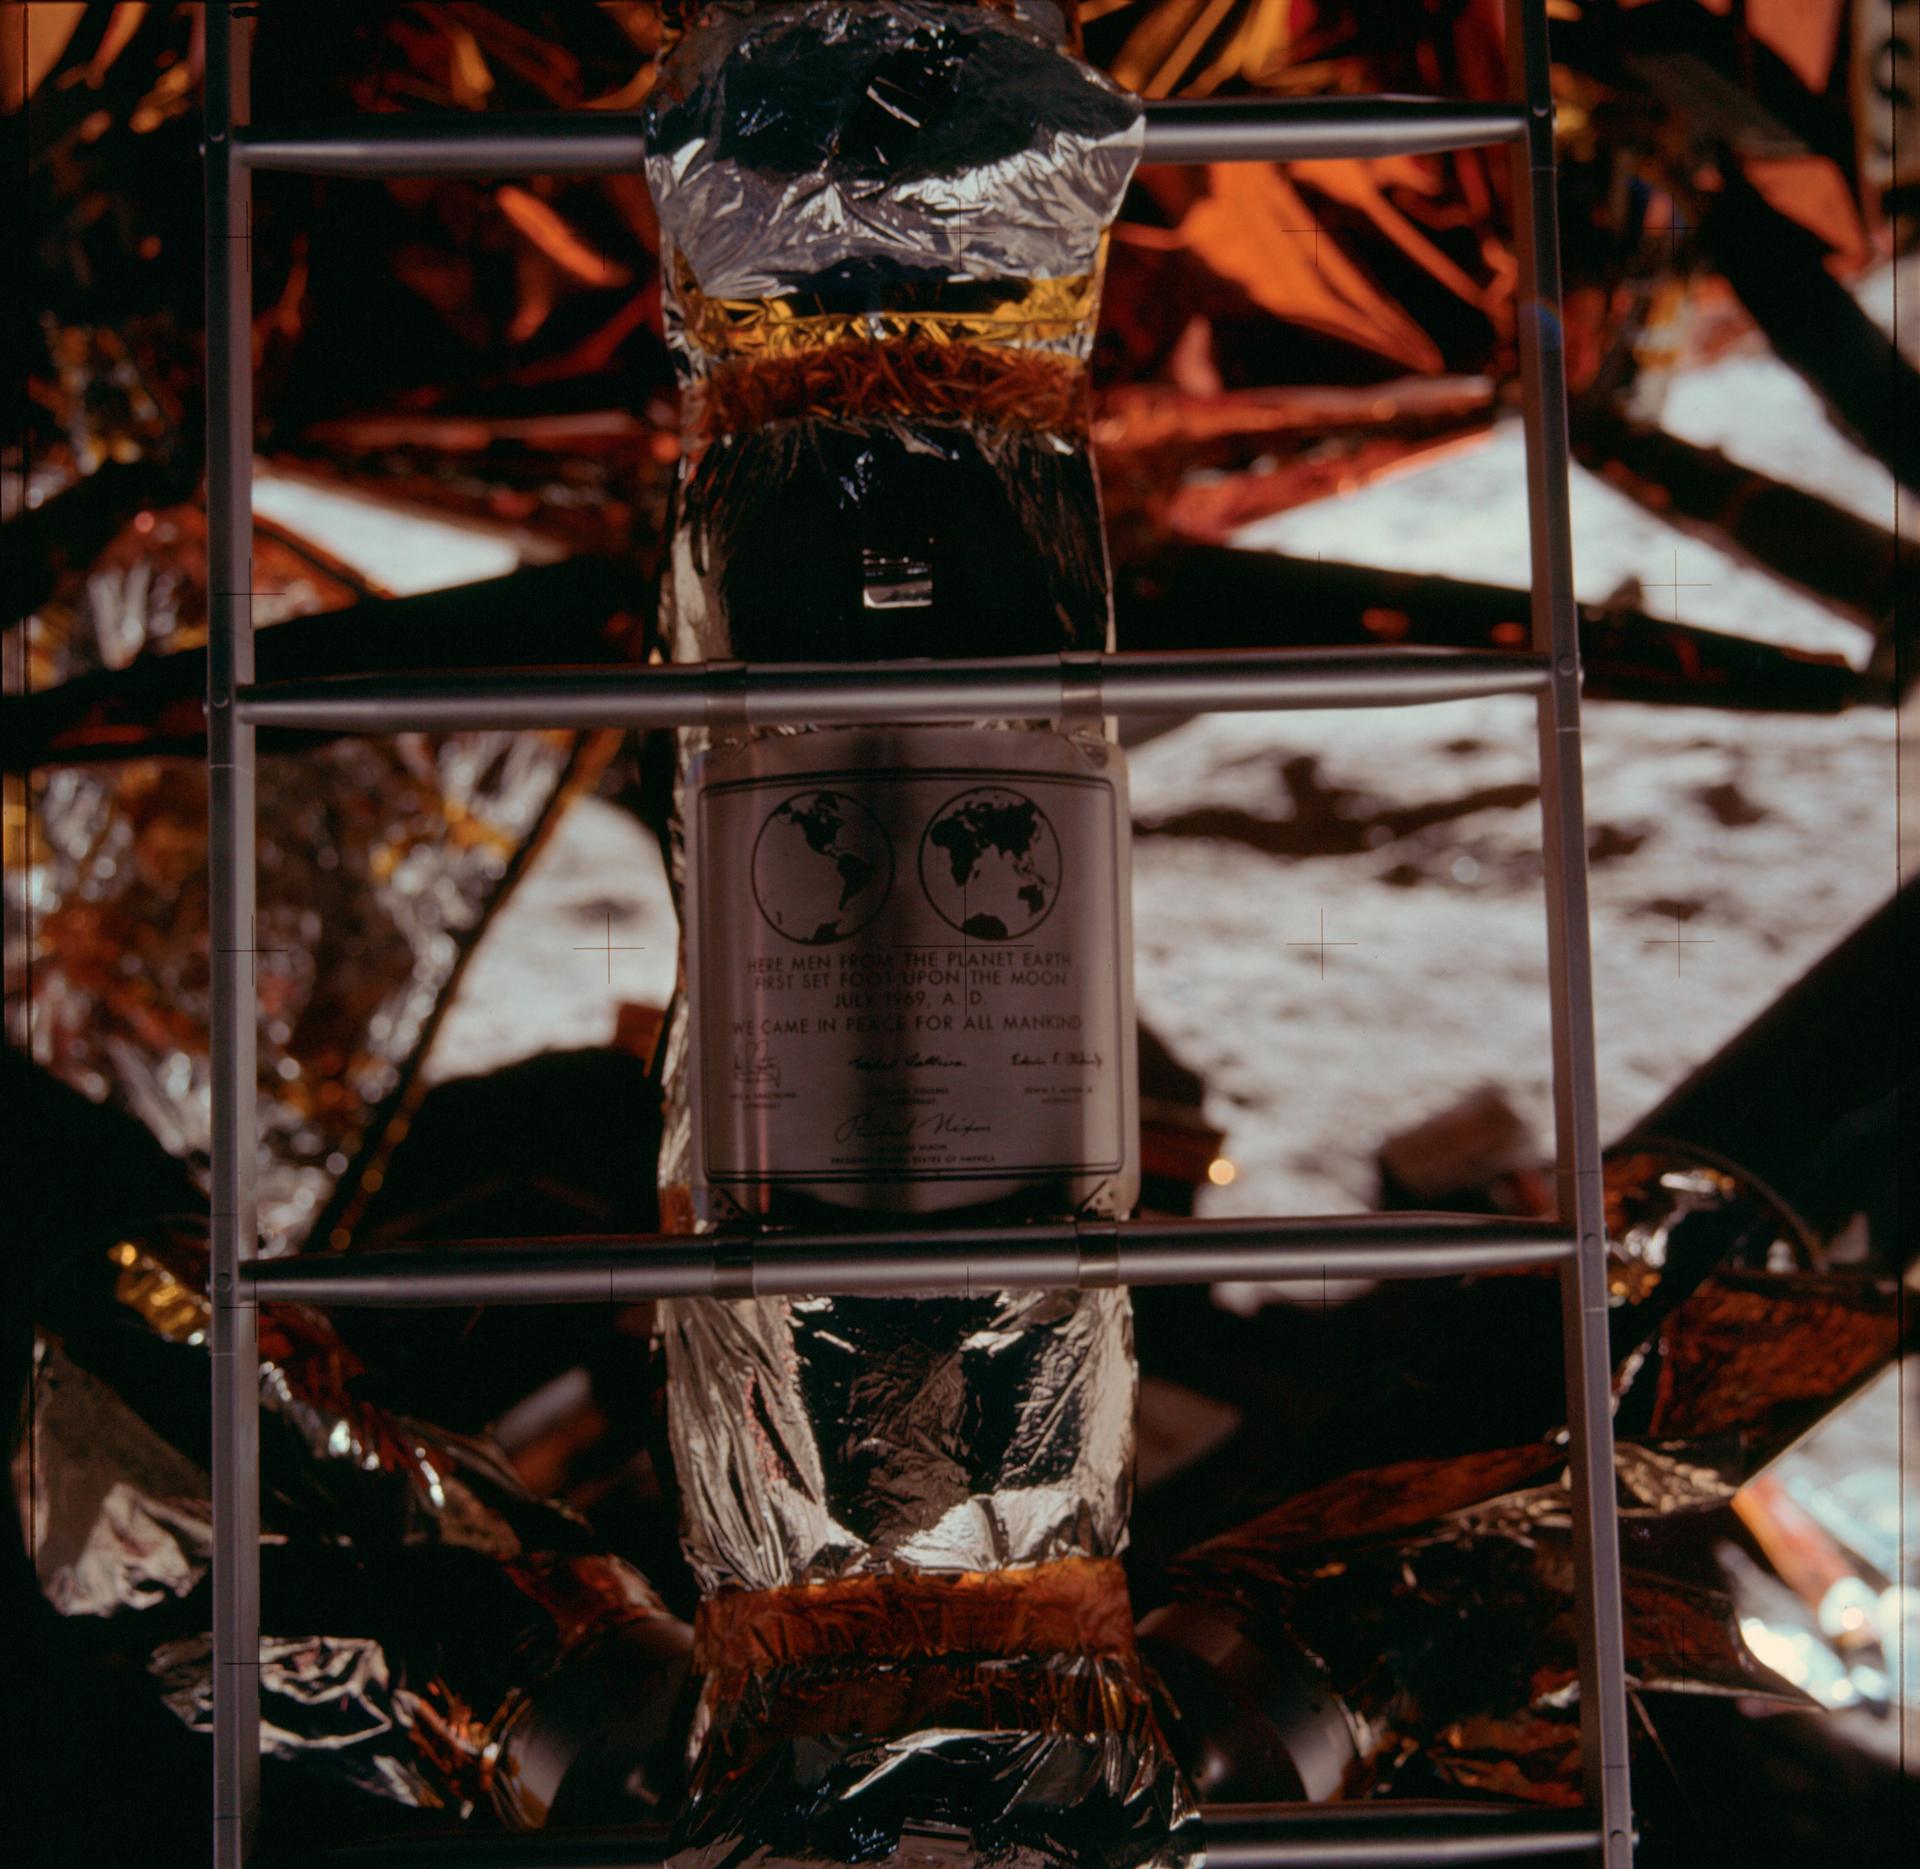 The moon landing and the first images from the lunar surface